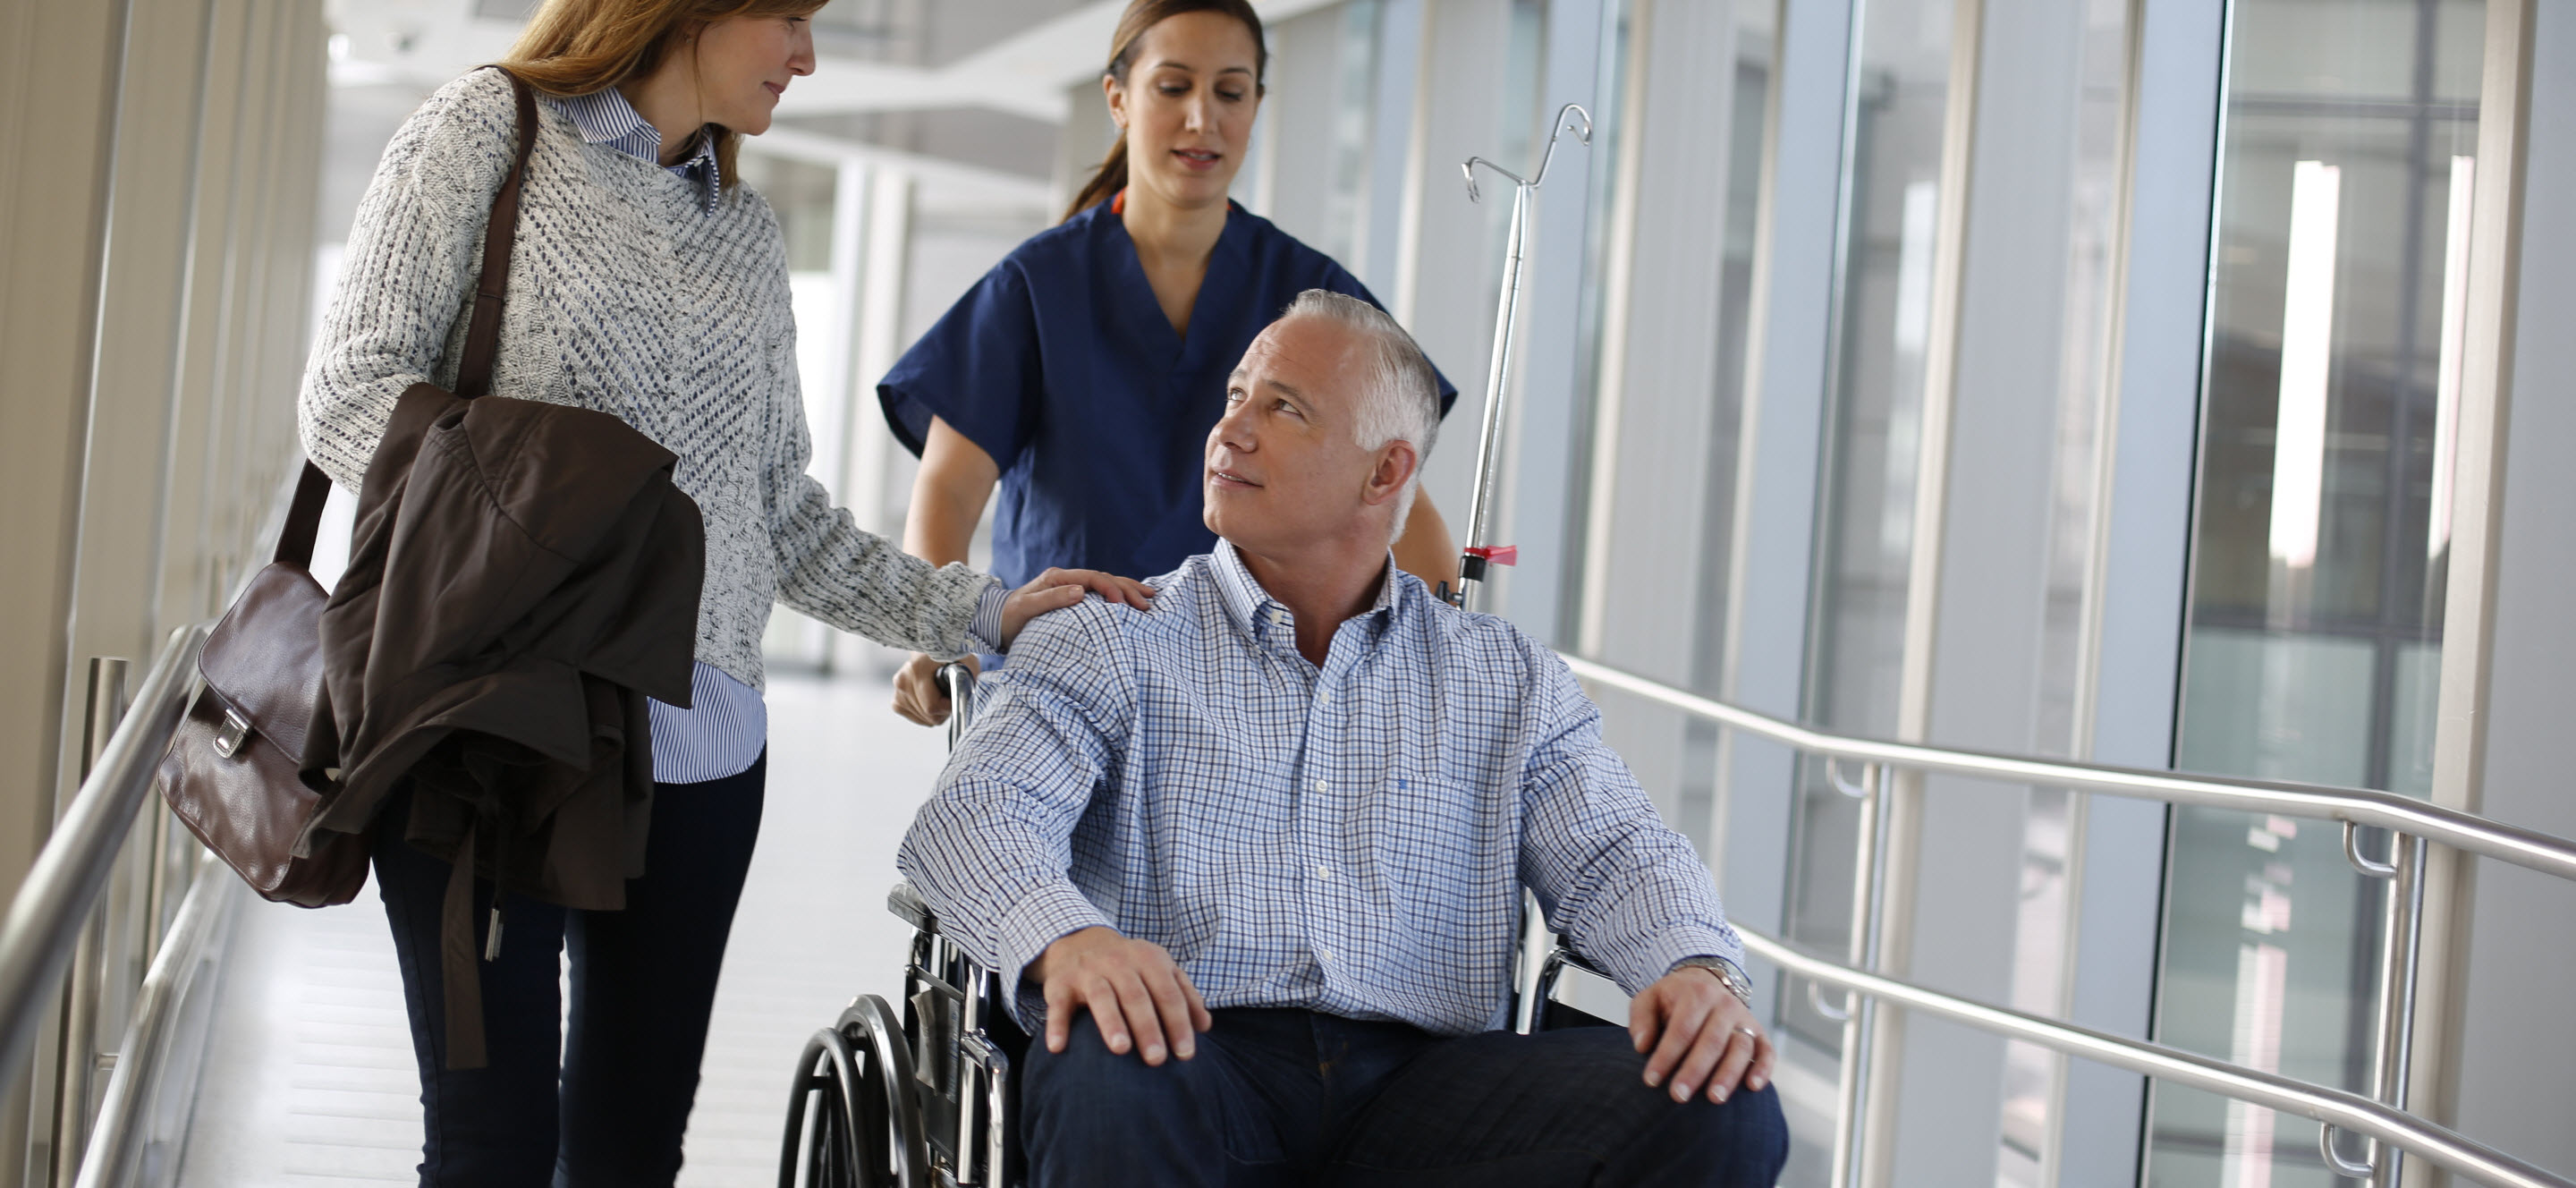 Older man in wheelchair looks up at daughter as healthcare professional pushes the wheelchair.